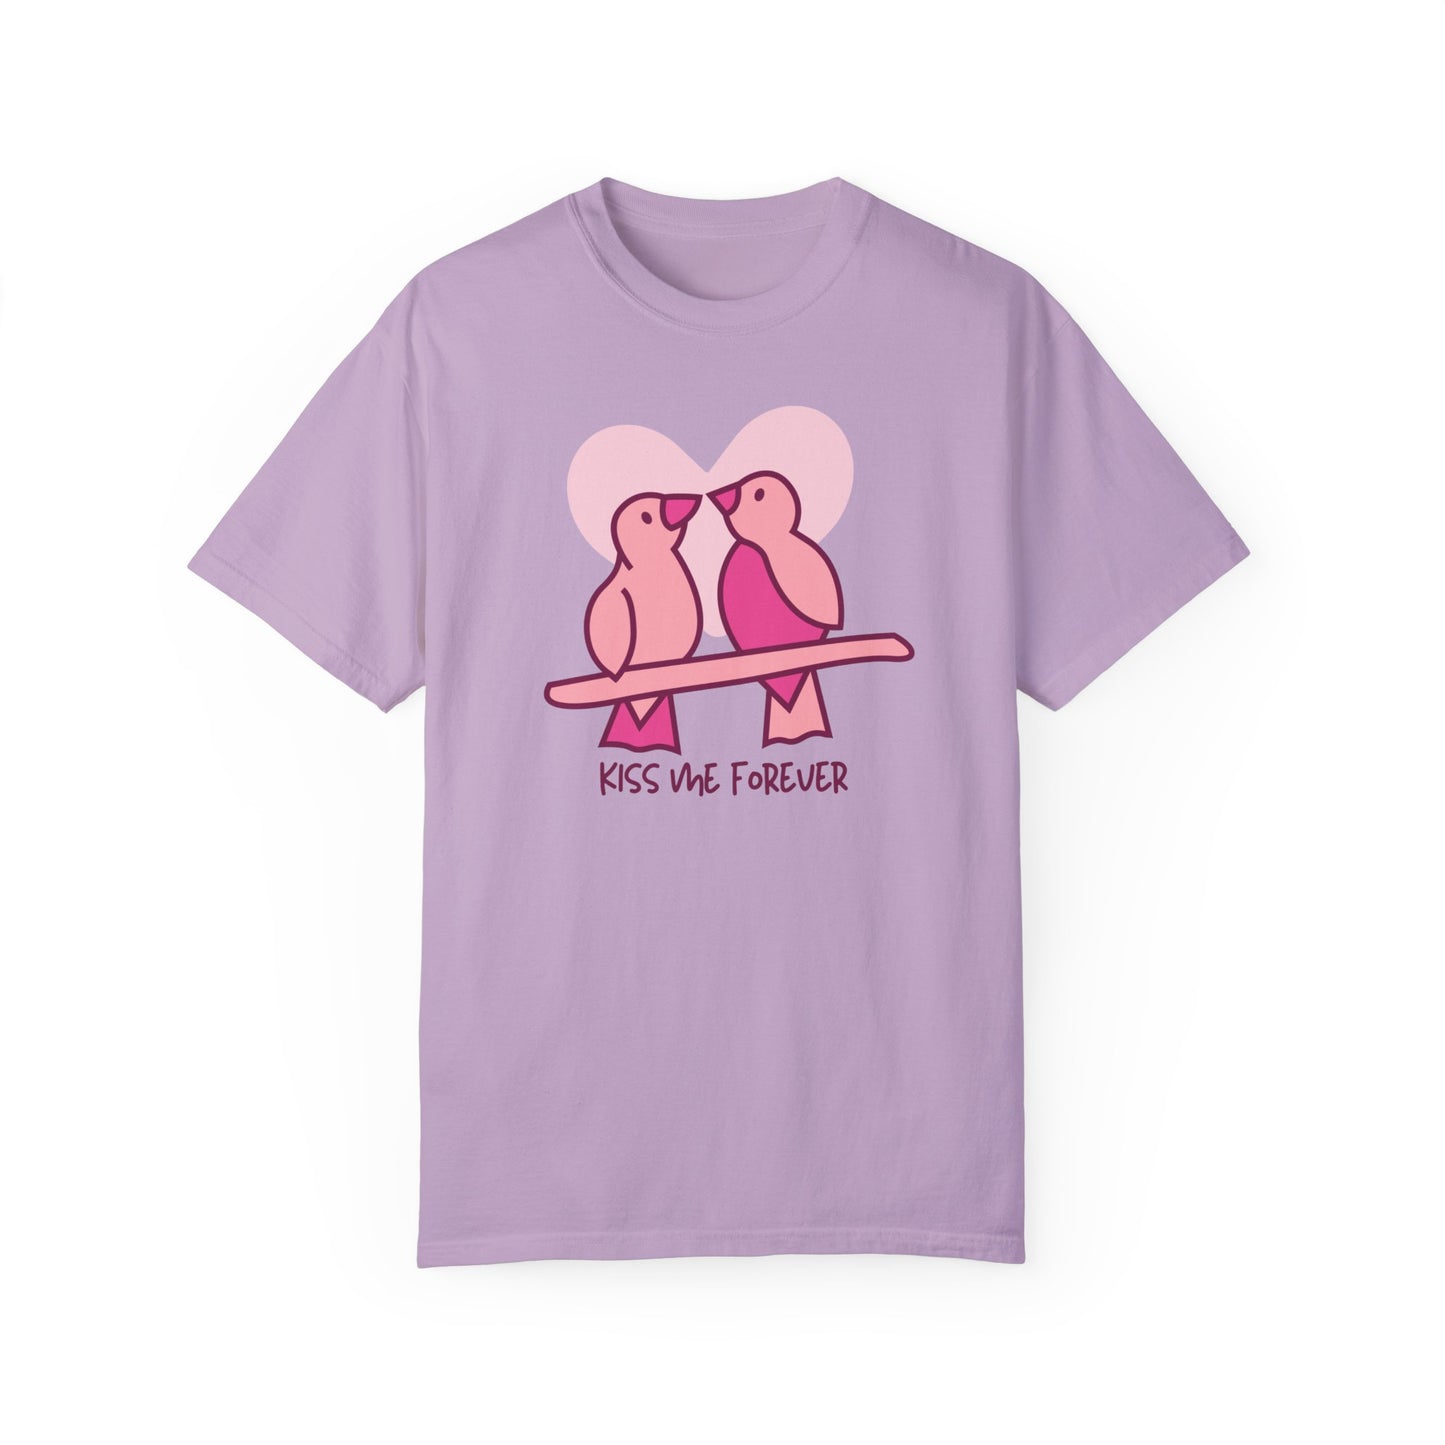 Love Birds Graphic Shirt Kiss Me Forever Valentine's Day Love You Forever Oversize Shirt Hoodie Pink Birds Gift for Her Mom Wife Girlfriend